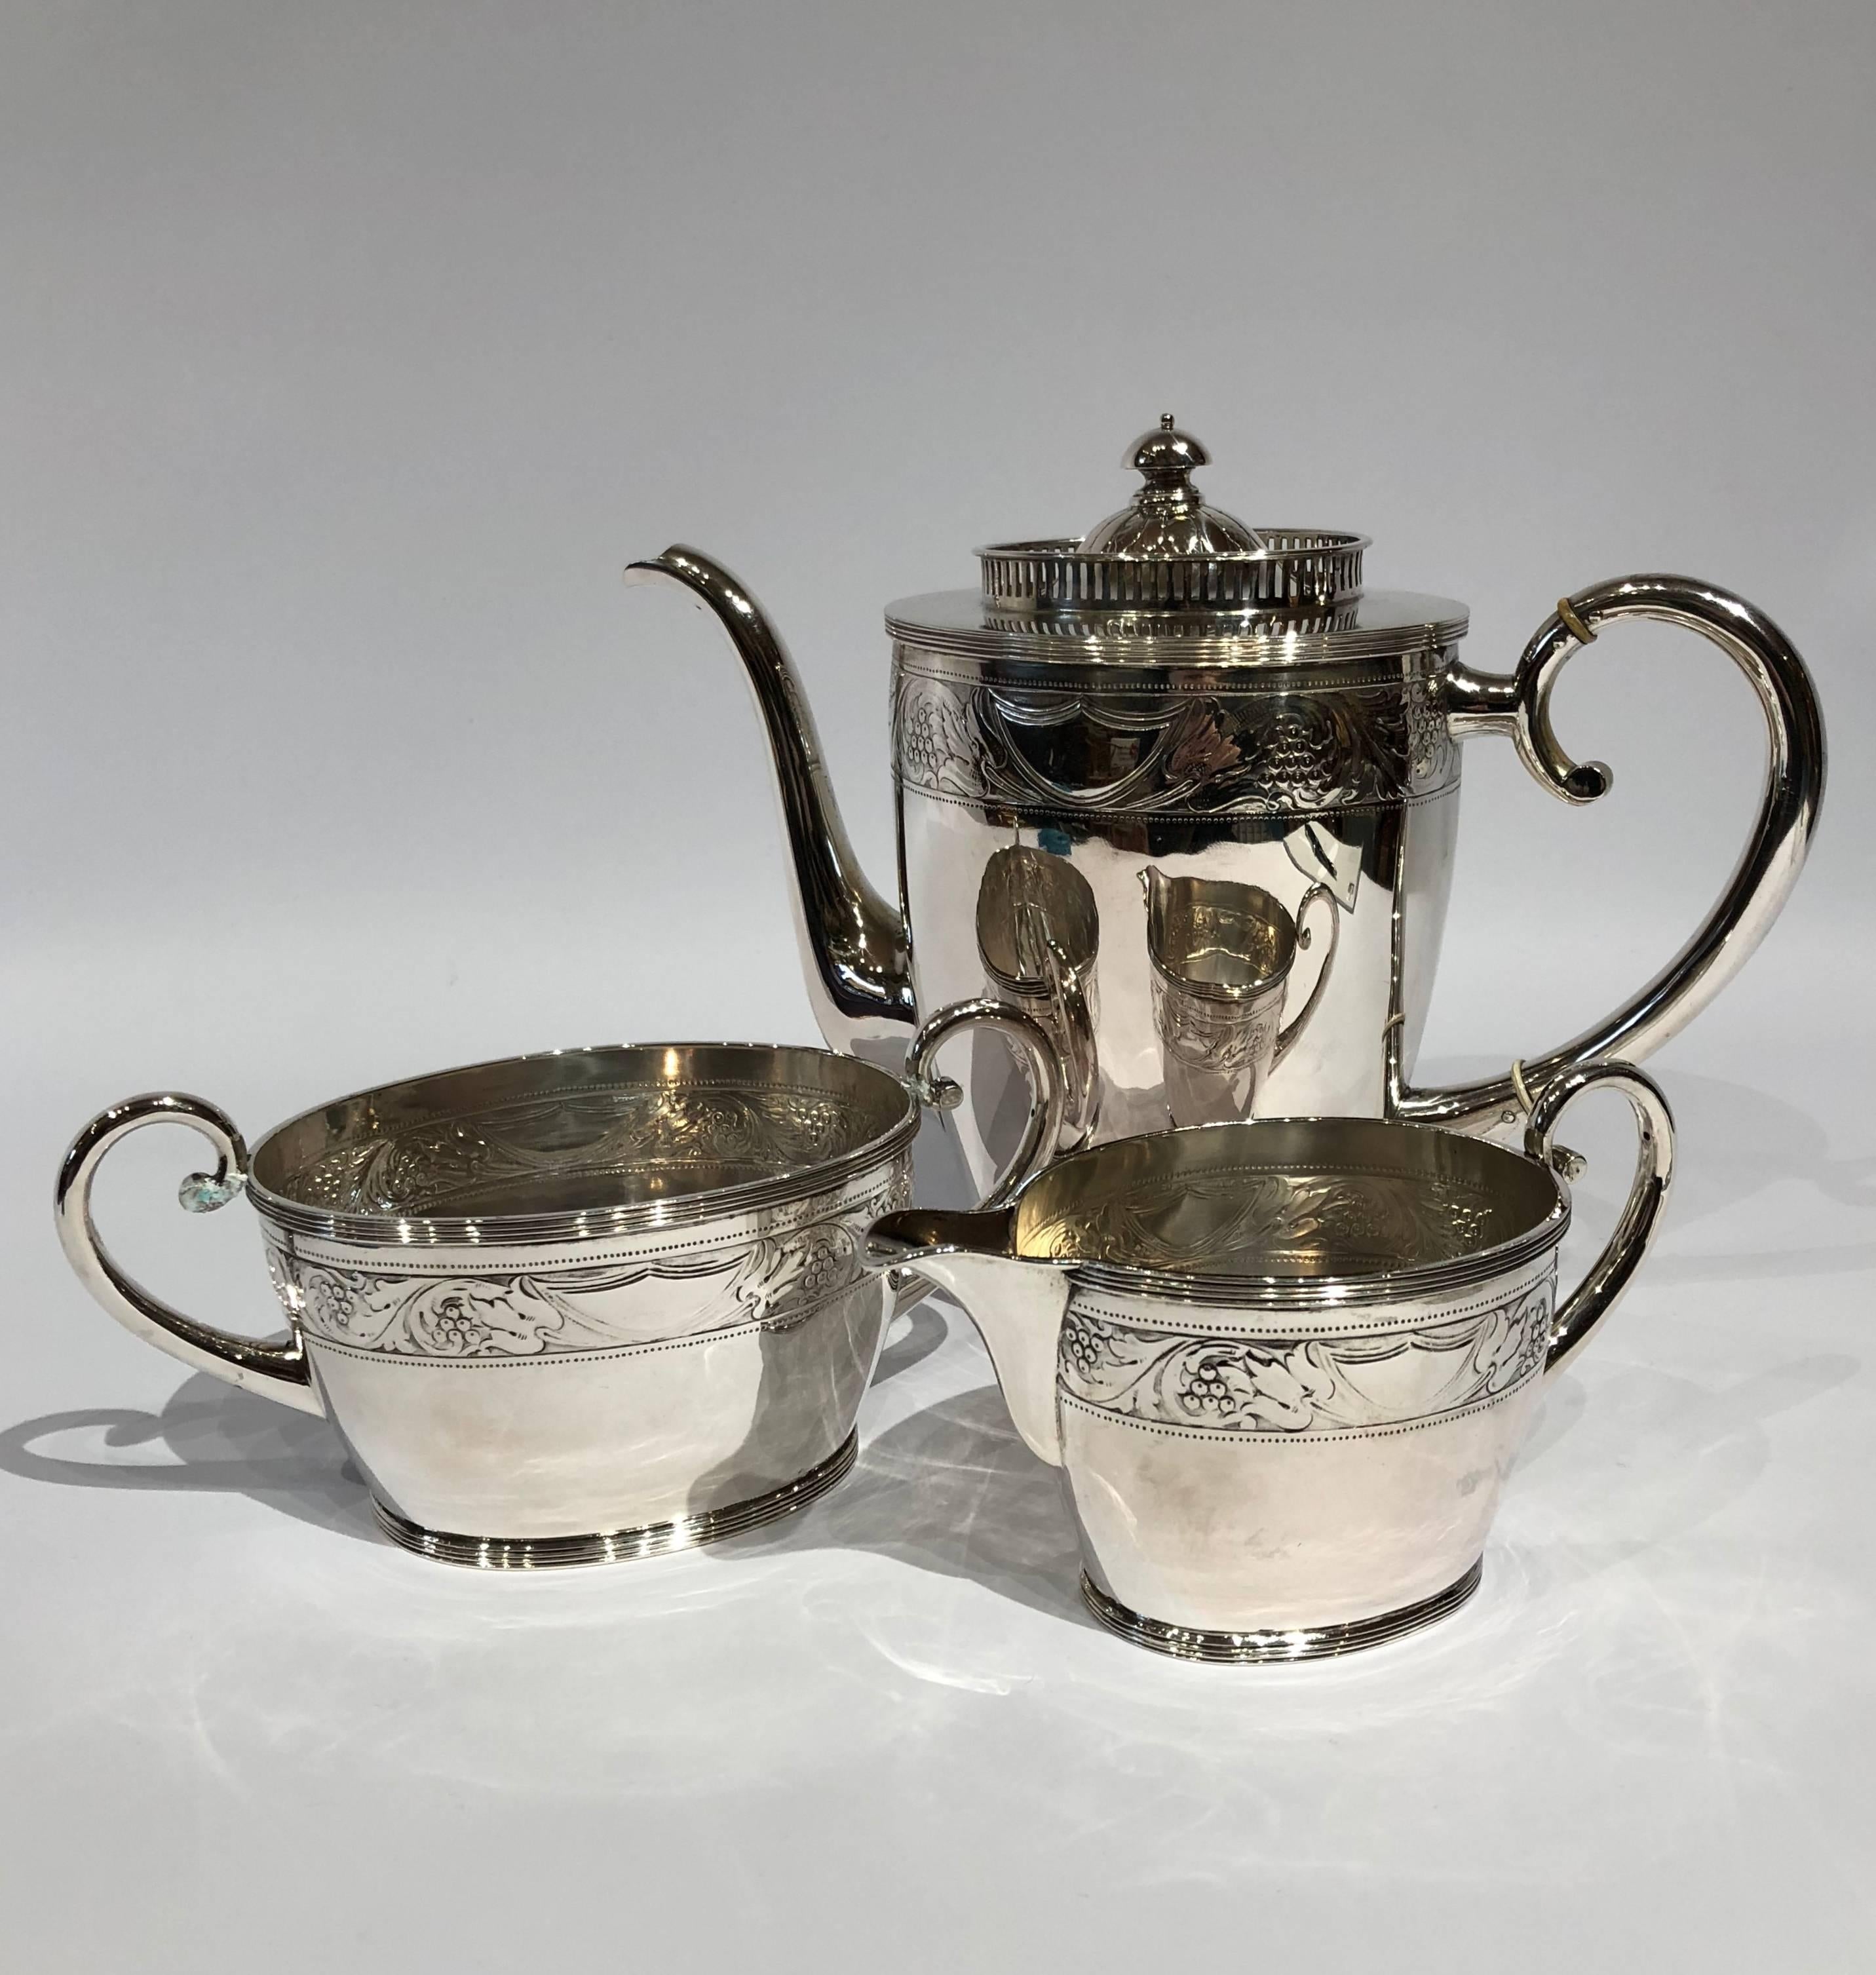 This coffee set comprises a coffee jug, sugar bowl, and cream jug, each adorned with intricate chasings. Crafted from hallmarked silver and stamped with the initials 